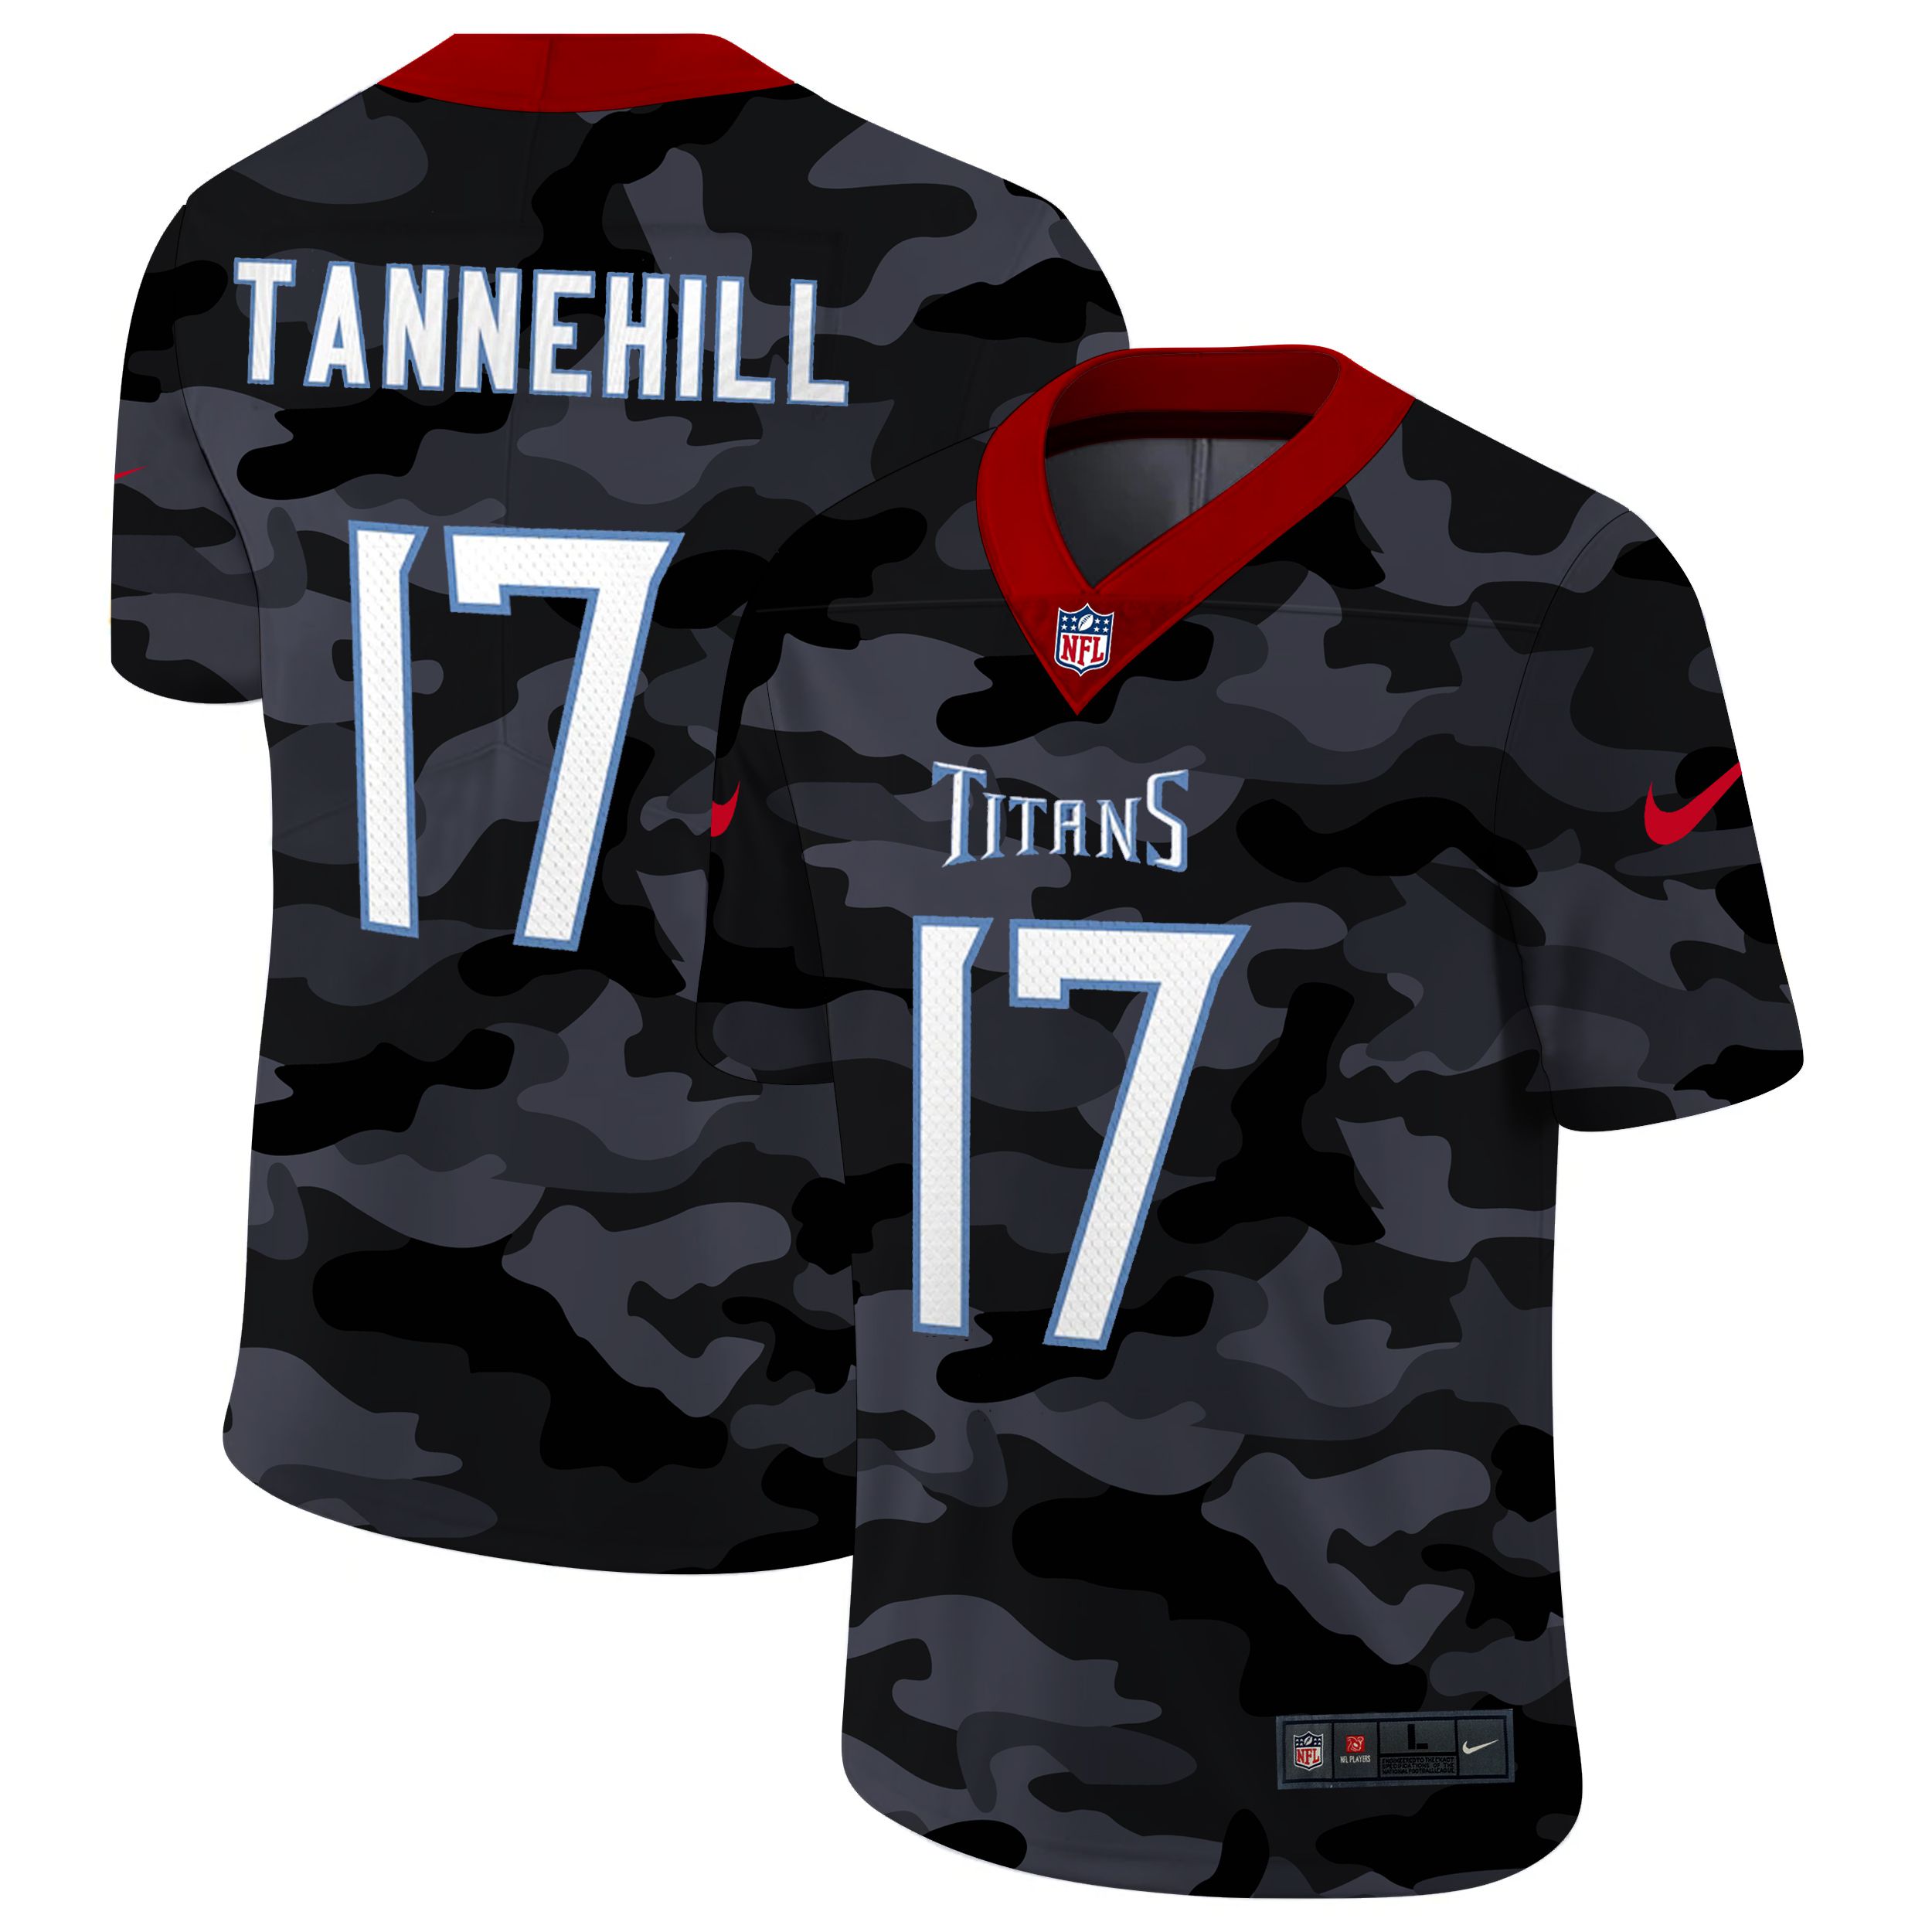 Men Tennessee Titans #17 Tannehill 2020 Nike 2ndCamo Salute to Service Limited NFL Jerseys